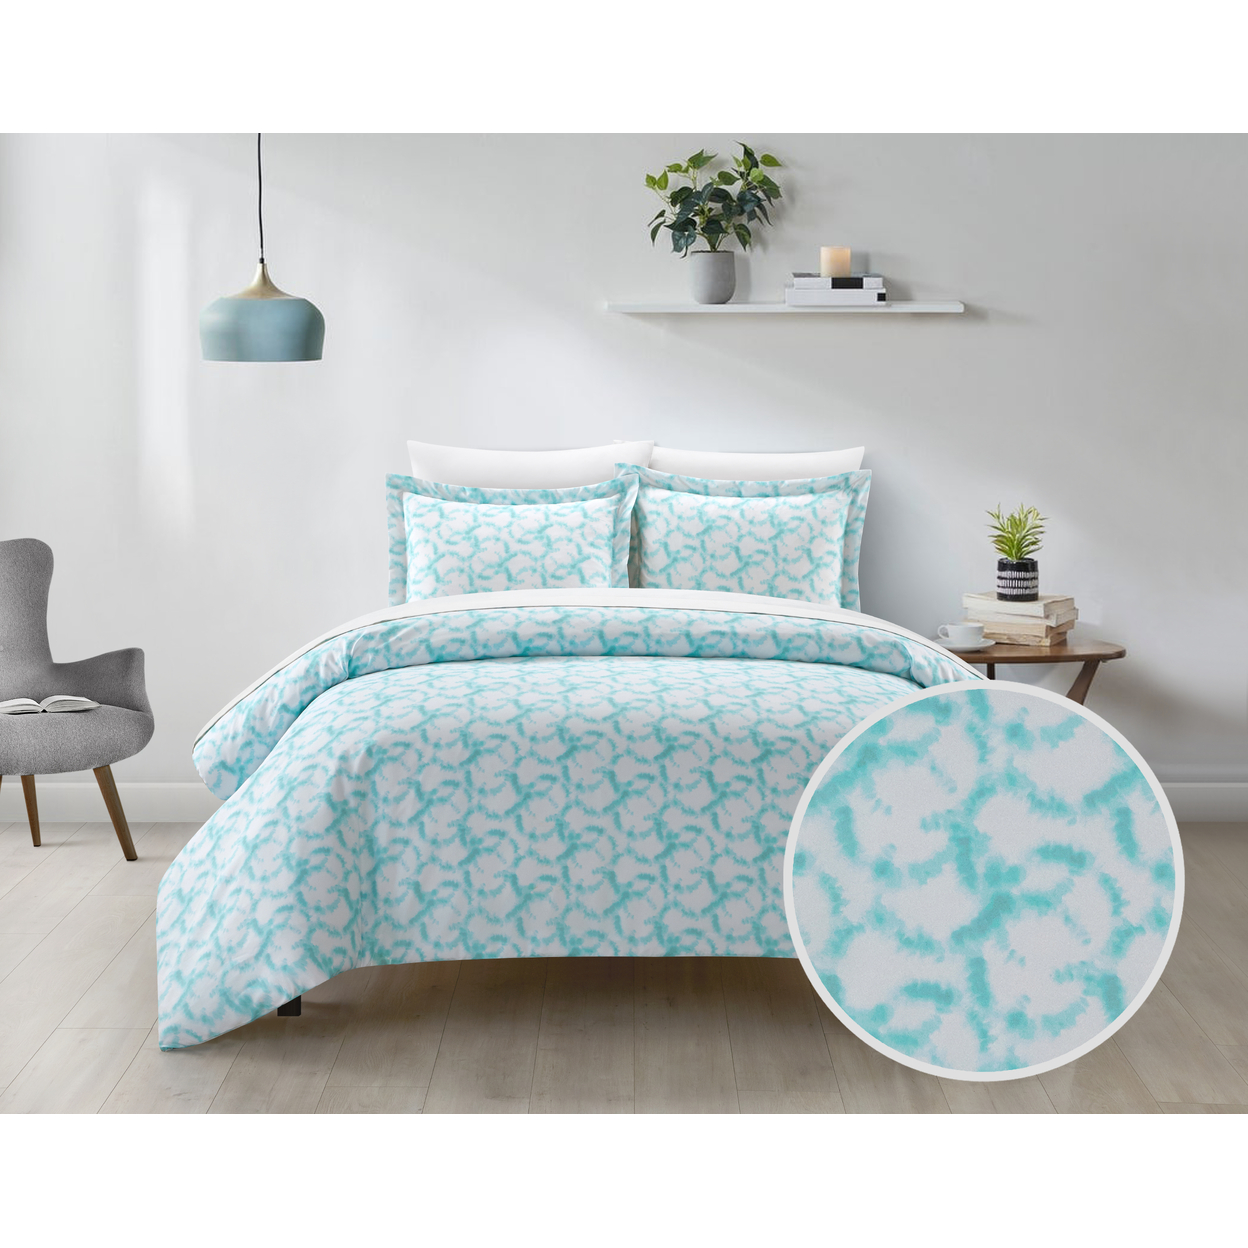 Khrissie 2 Or 3 Piece Duvet Cover Set Watercolor Overlapping Rings Pattern - Aqua, Queen